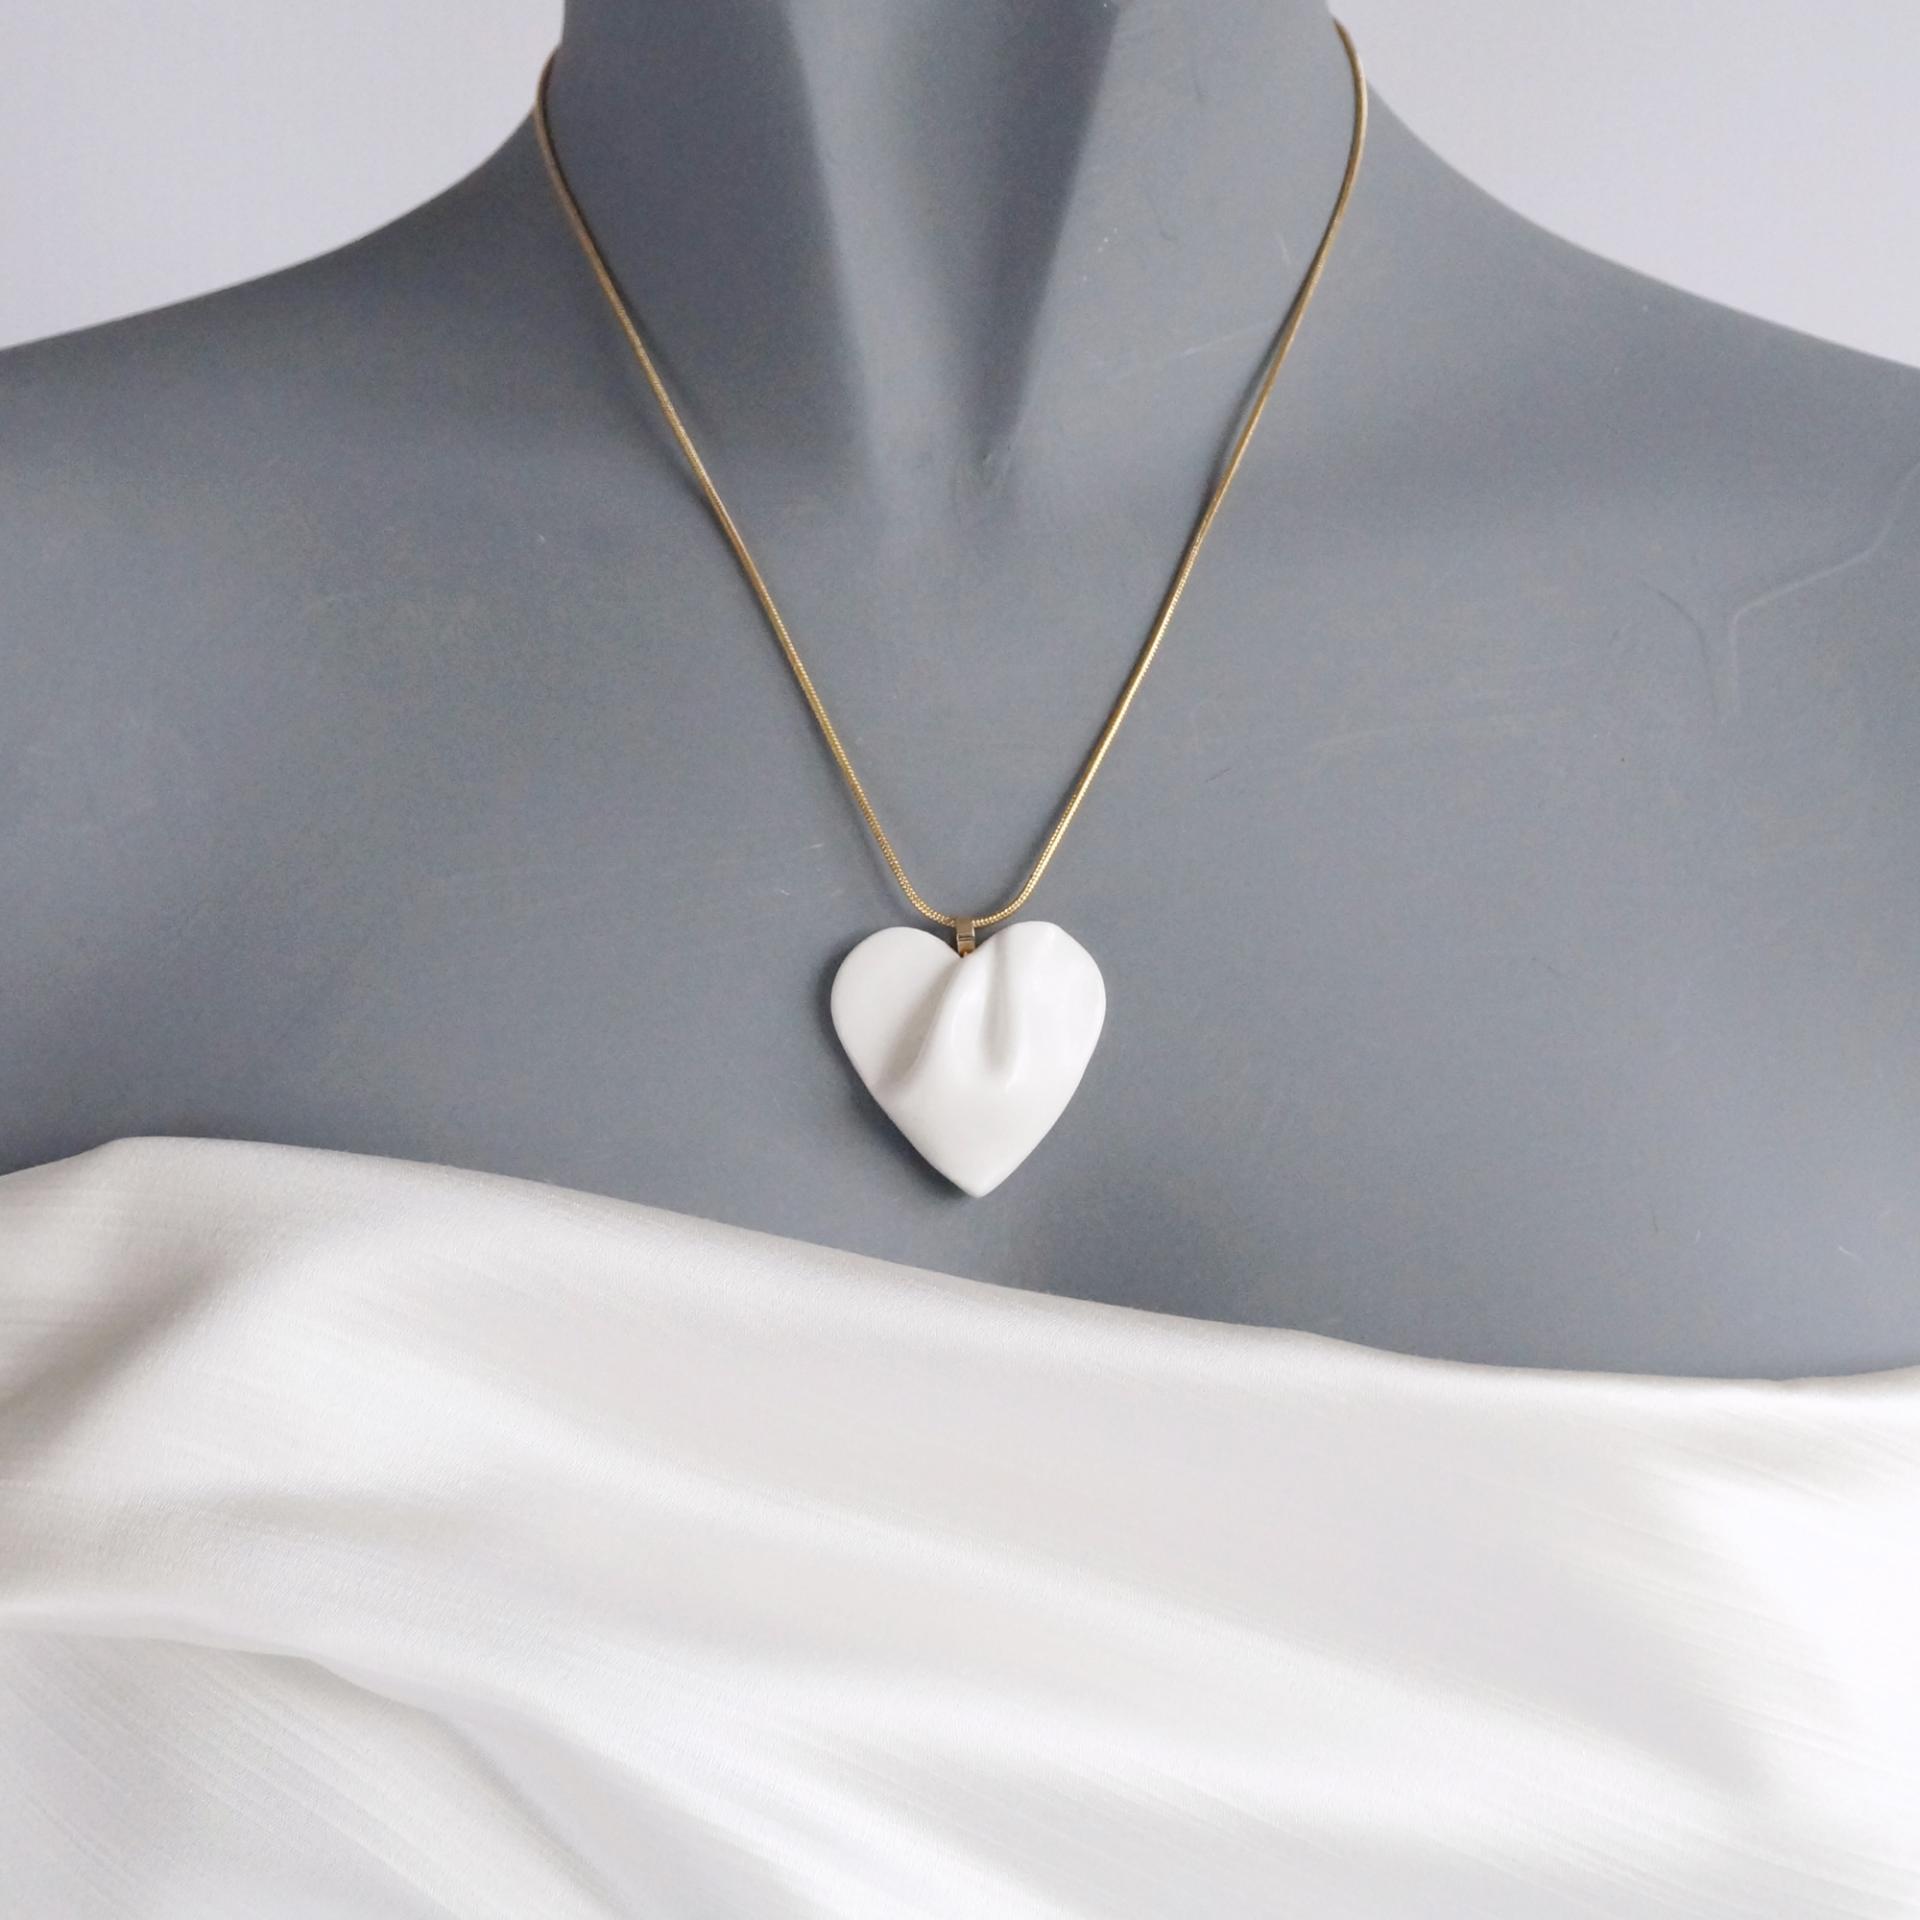 Bride necklace, white satin, draped heart, porcelain heart, heart necklace, gold, stainless steel, snake chain, Vanillakiln, 